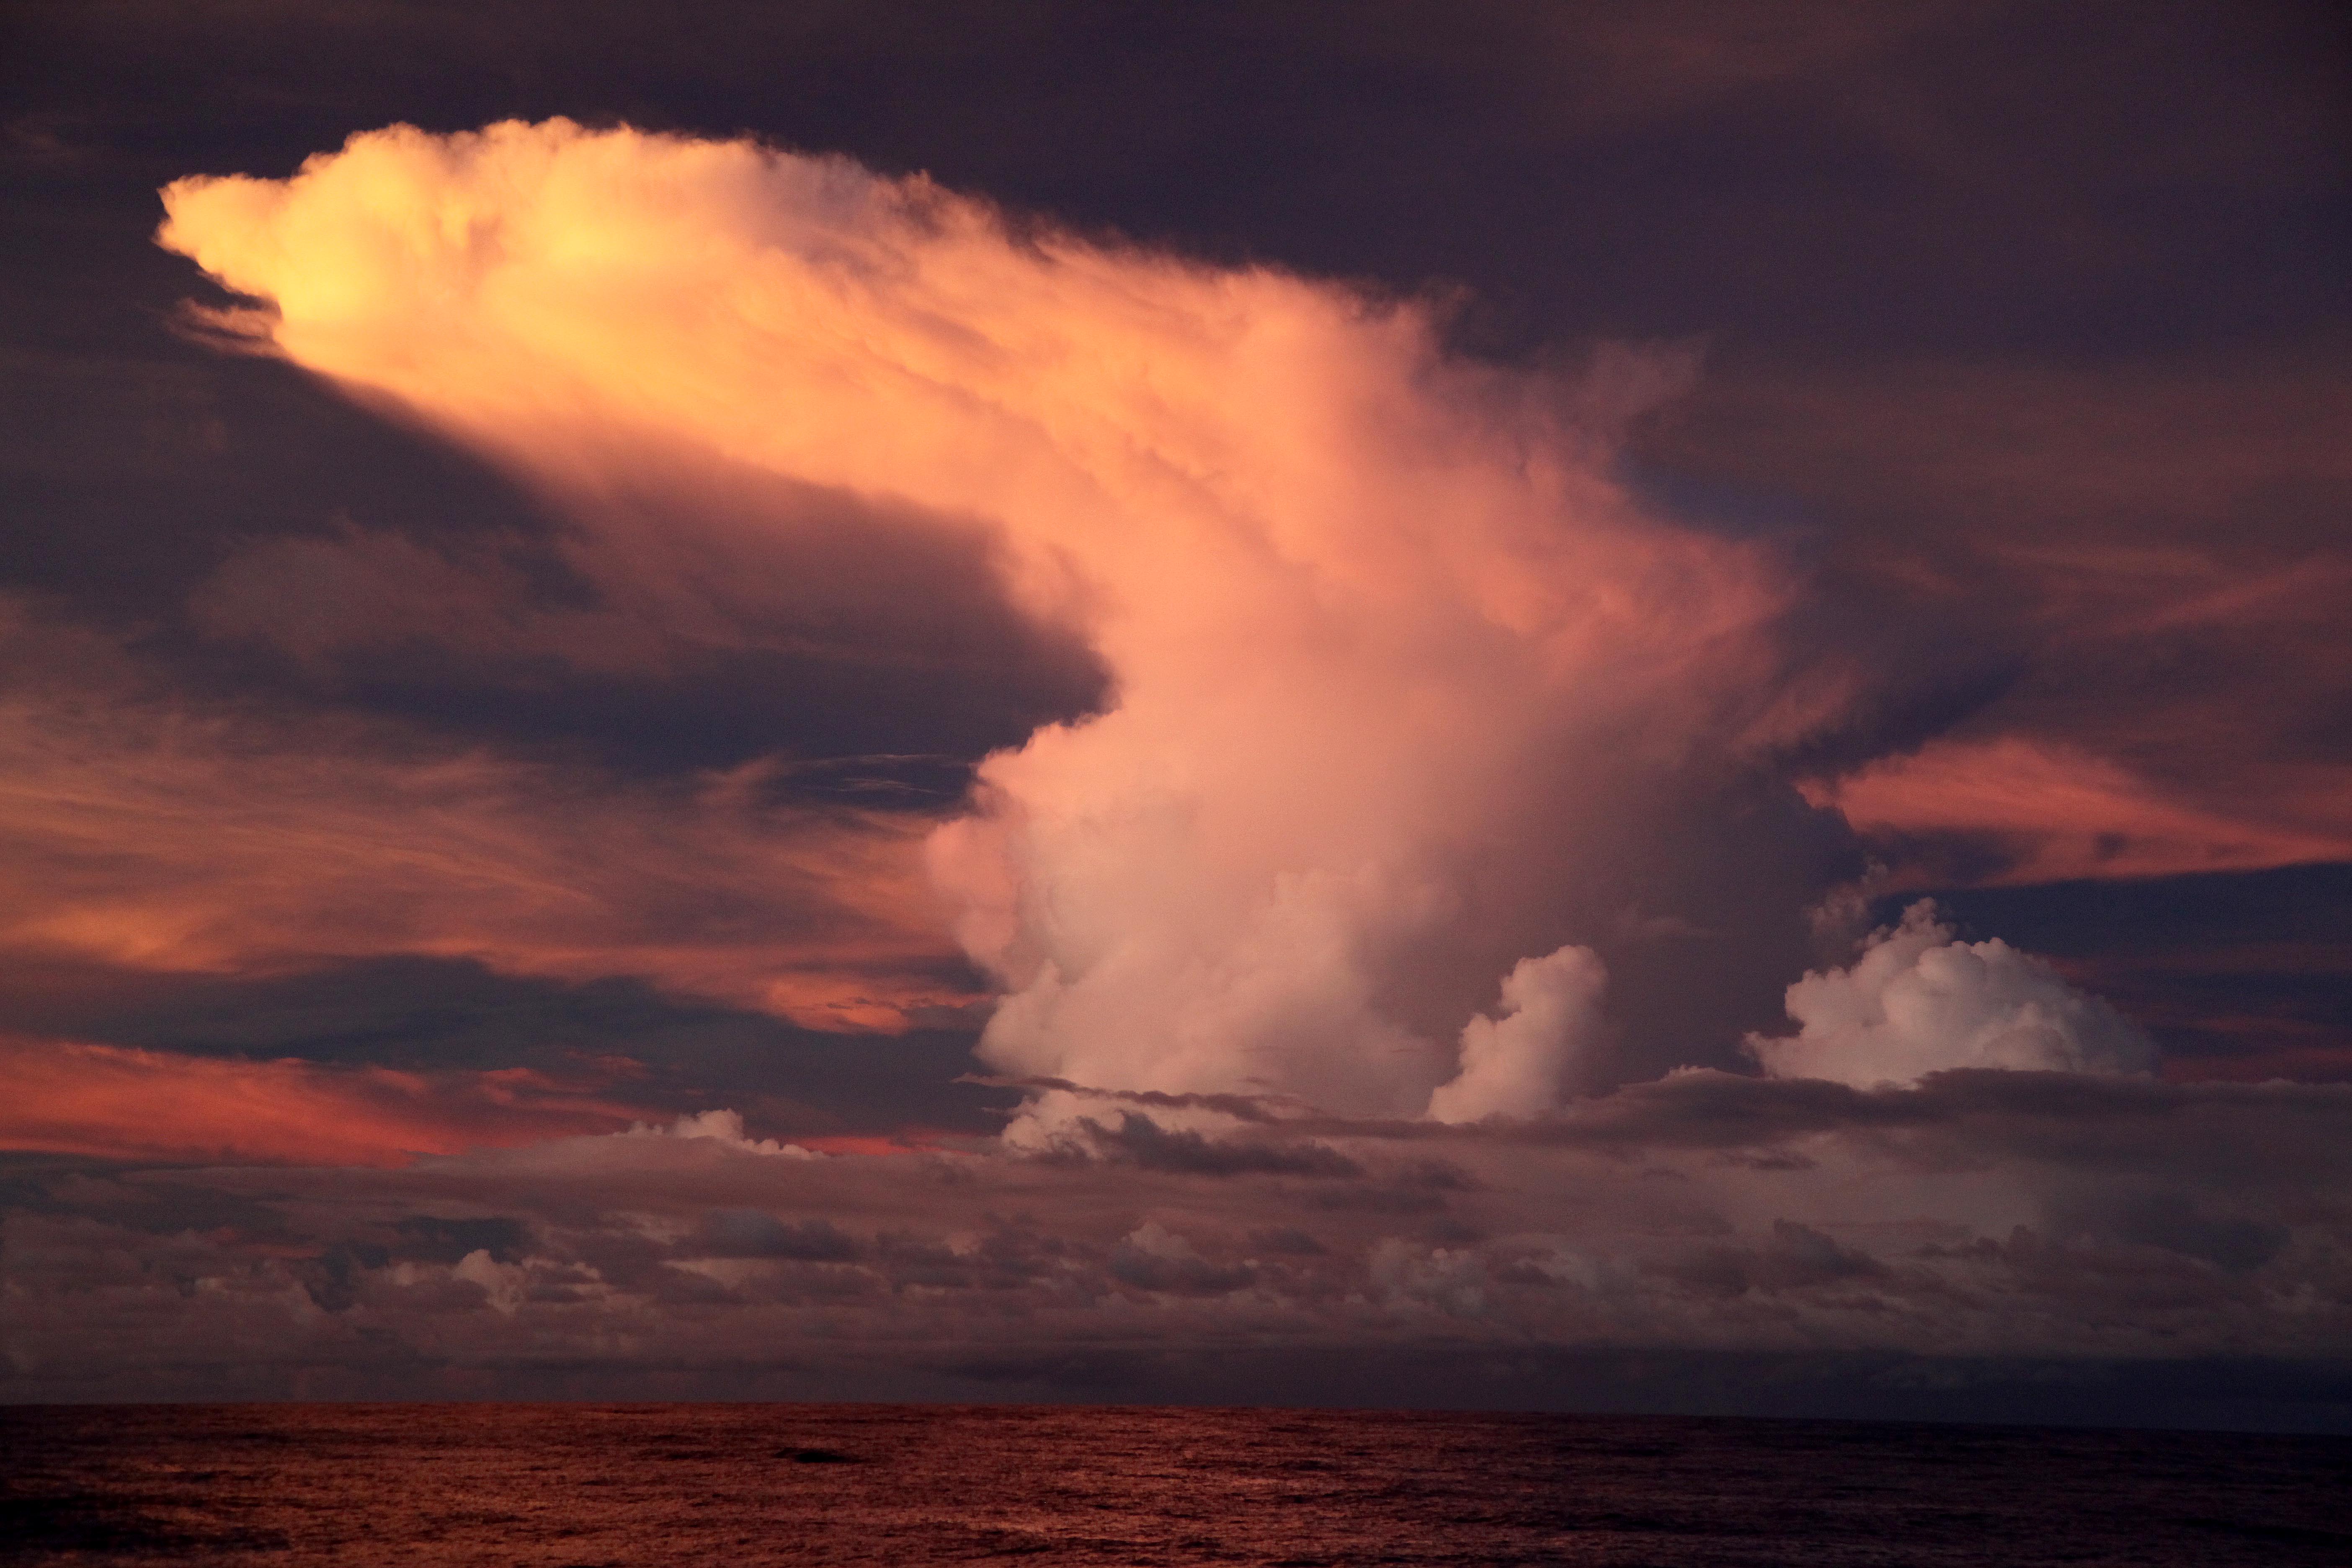 Cloud formations over the Pacific Ocean (image Richard Arculus)